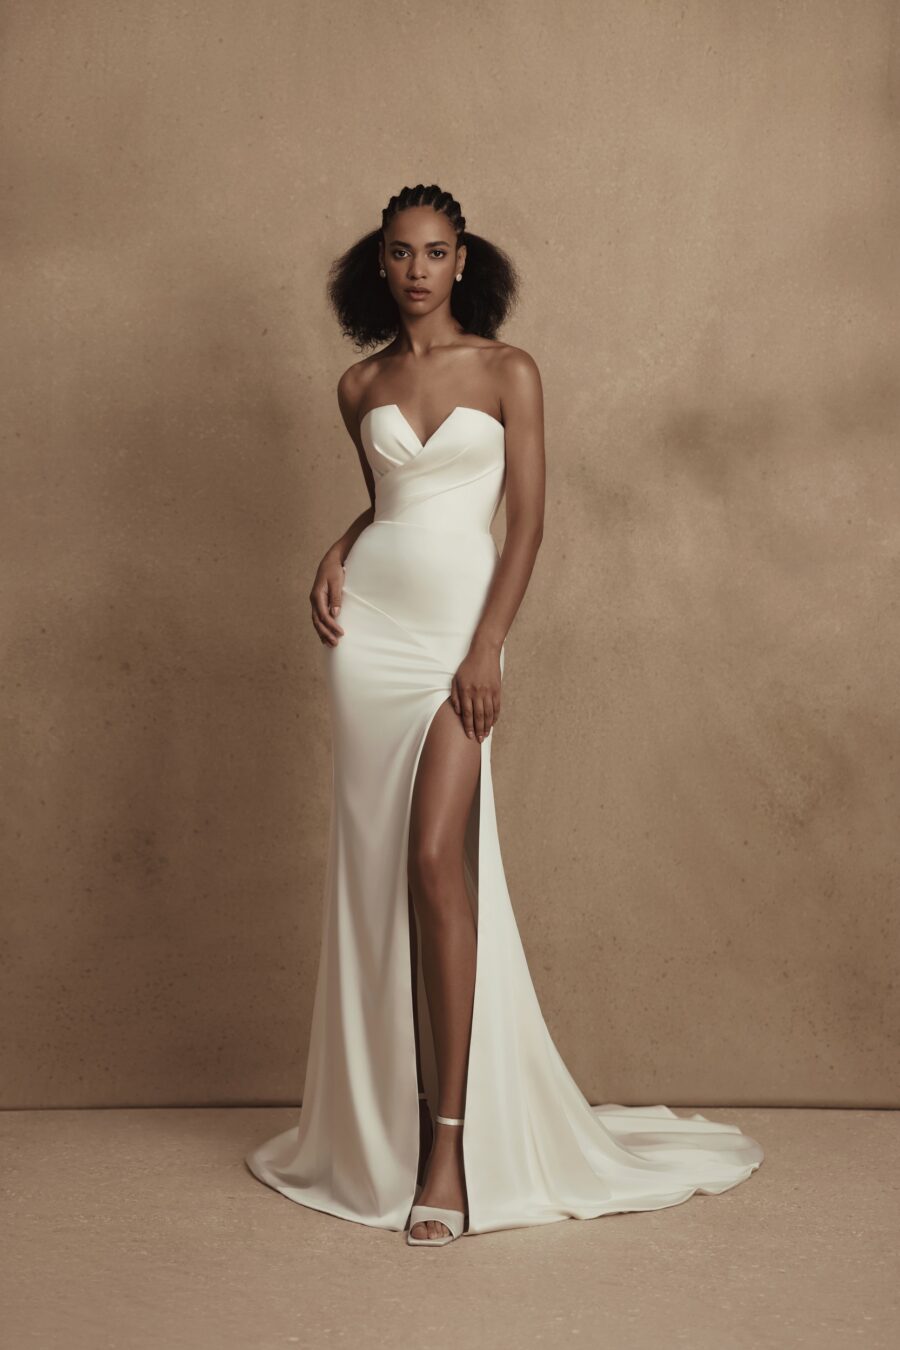 Brava 3 wedding dress by woná concept from personality collection